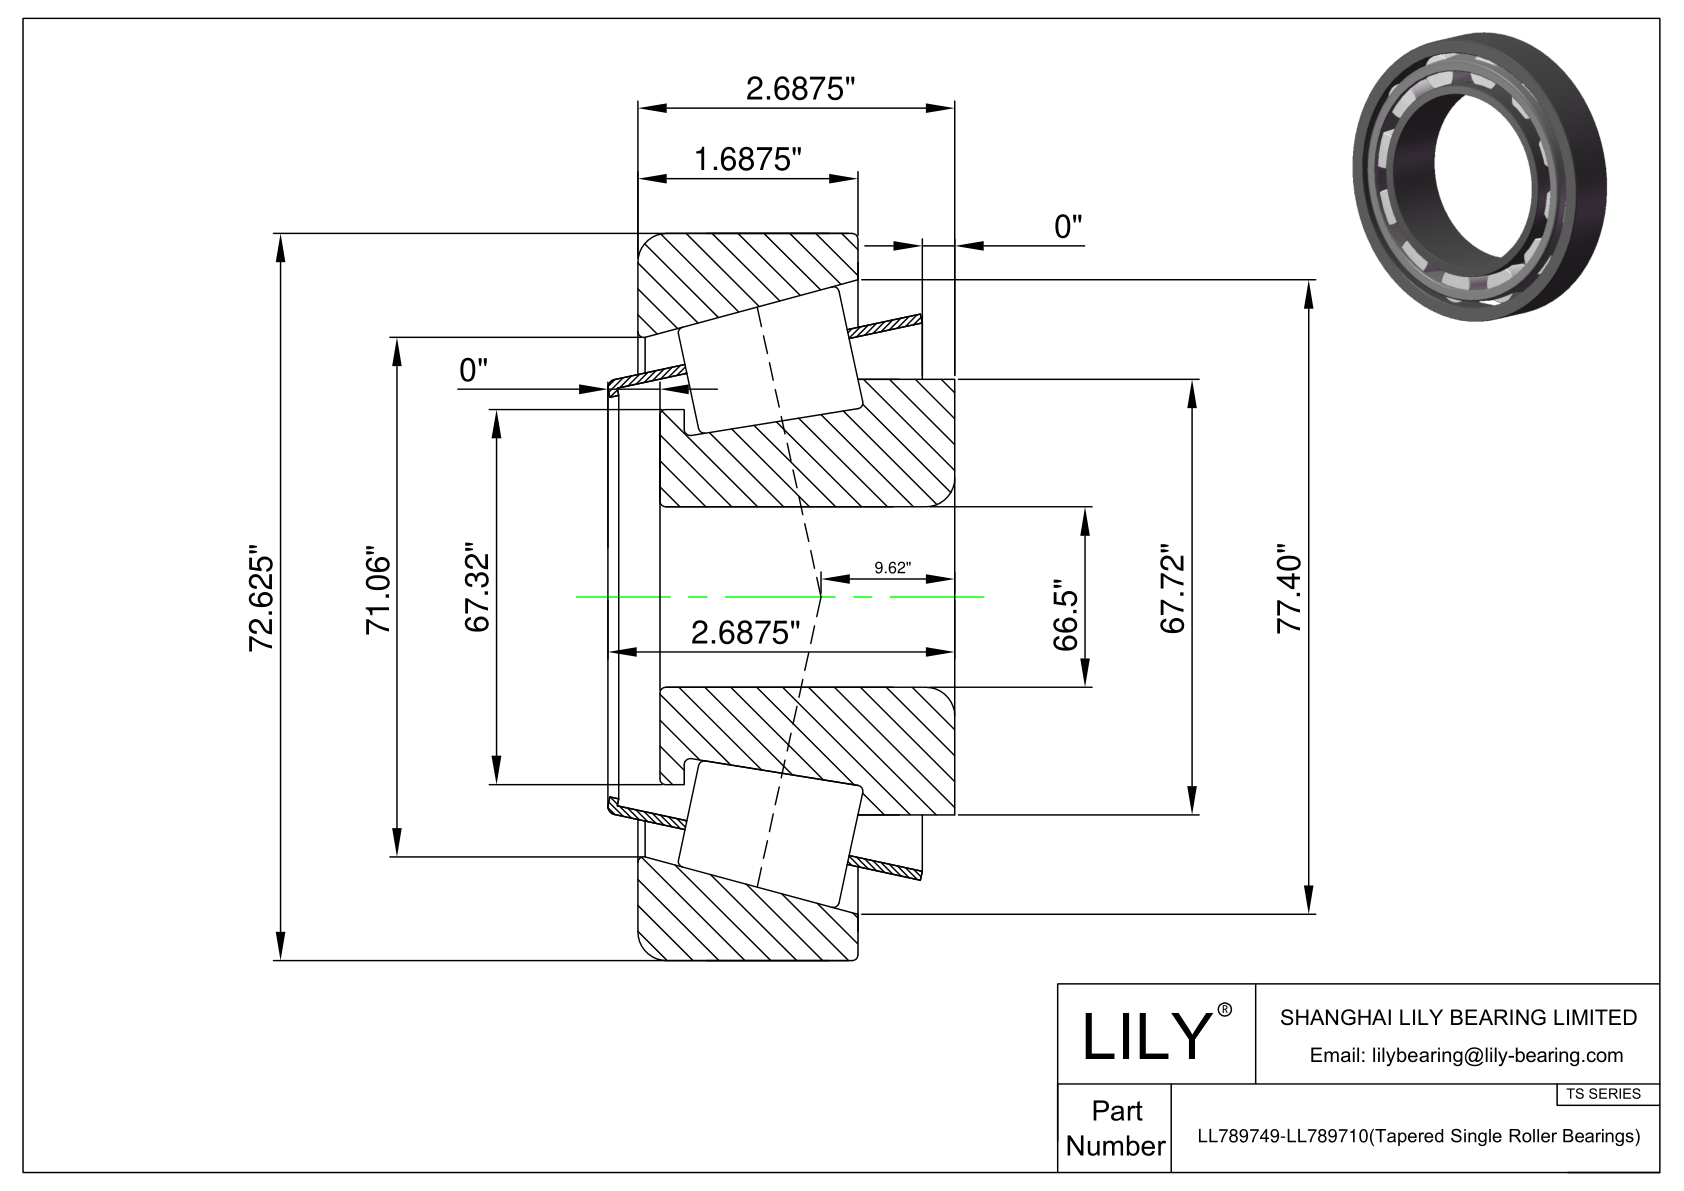 LL789749-LL789710 TS (Tapered Single Roller Bearings) (Imperial) cad drawing